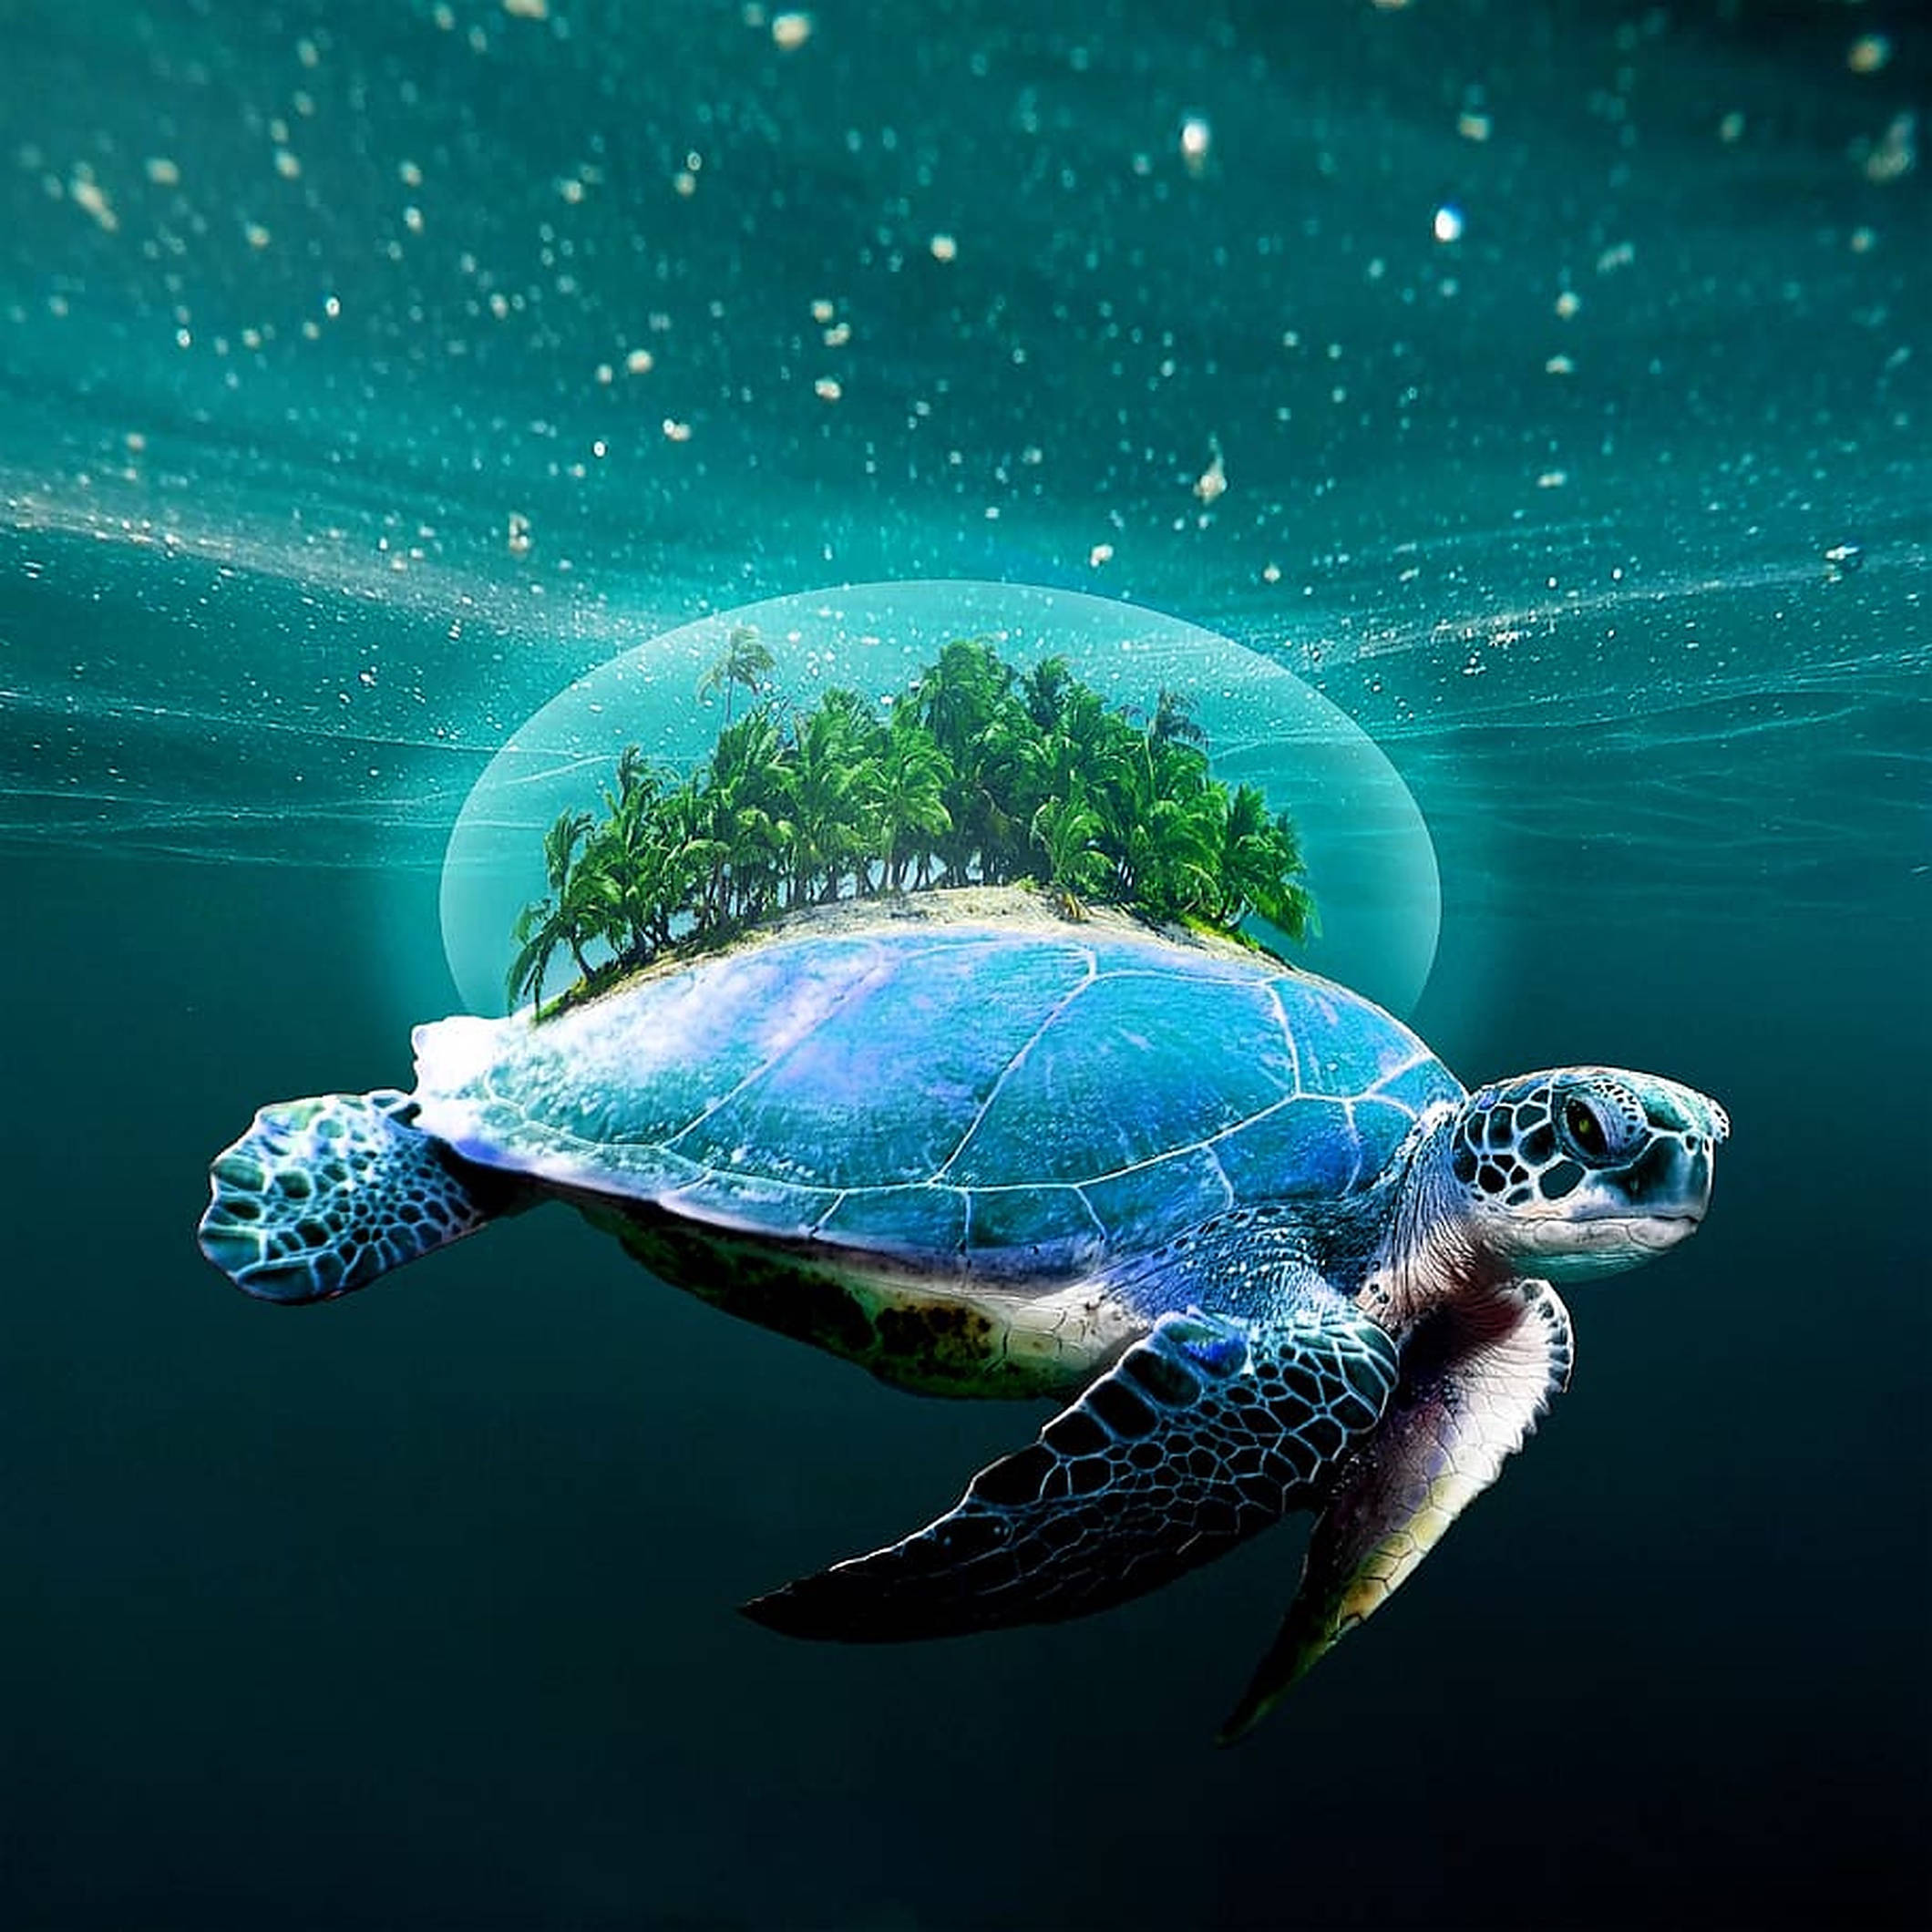 Download Turtle With Miniature Island Wallpaper